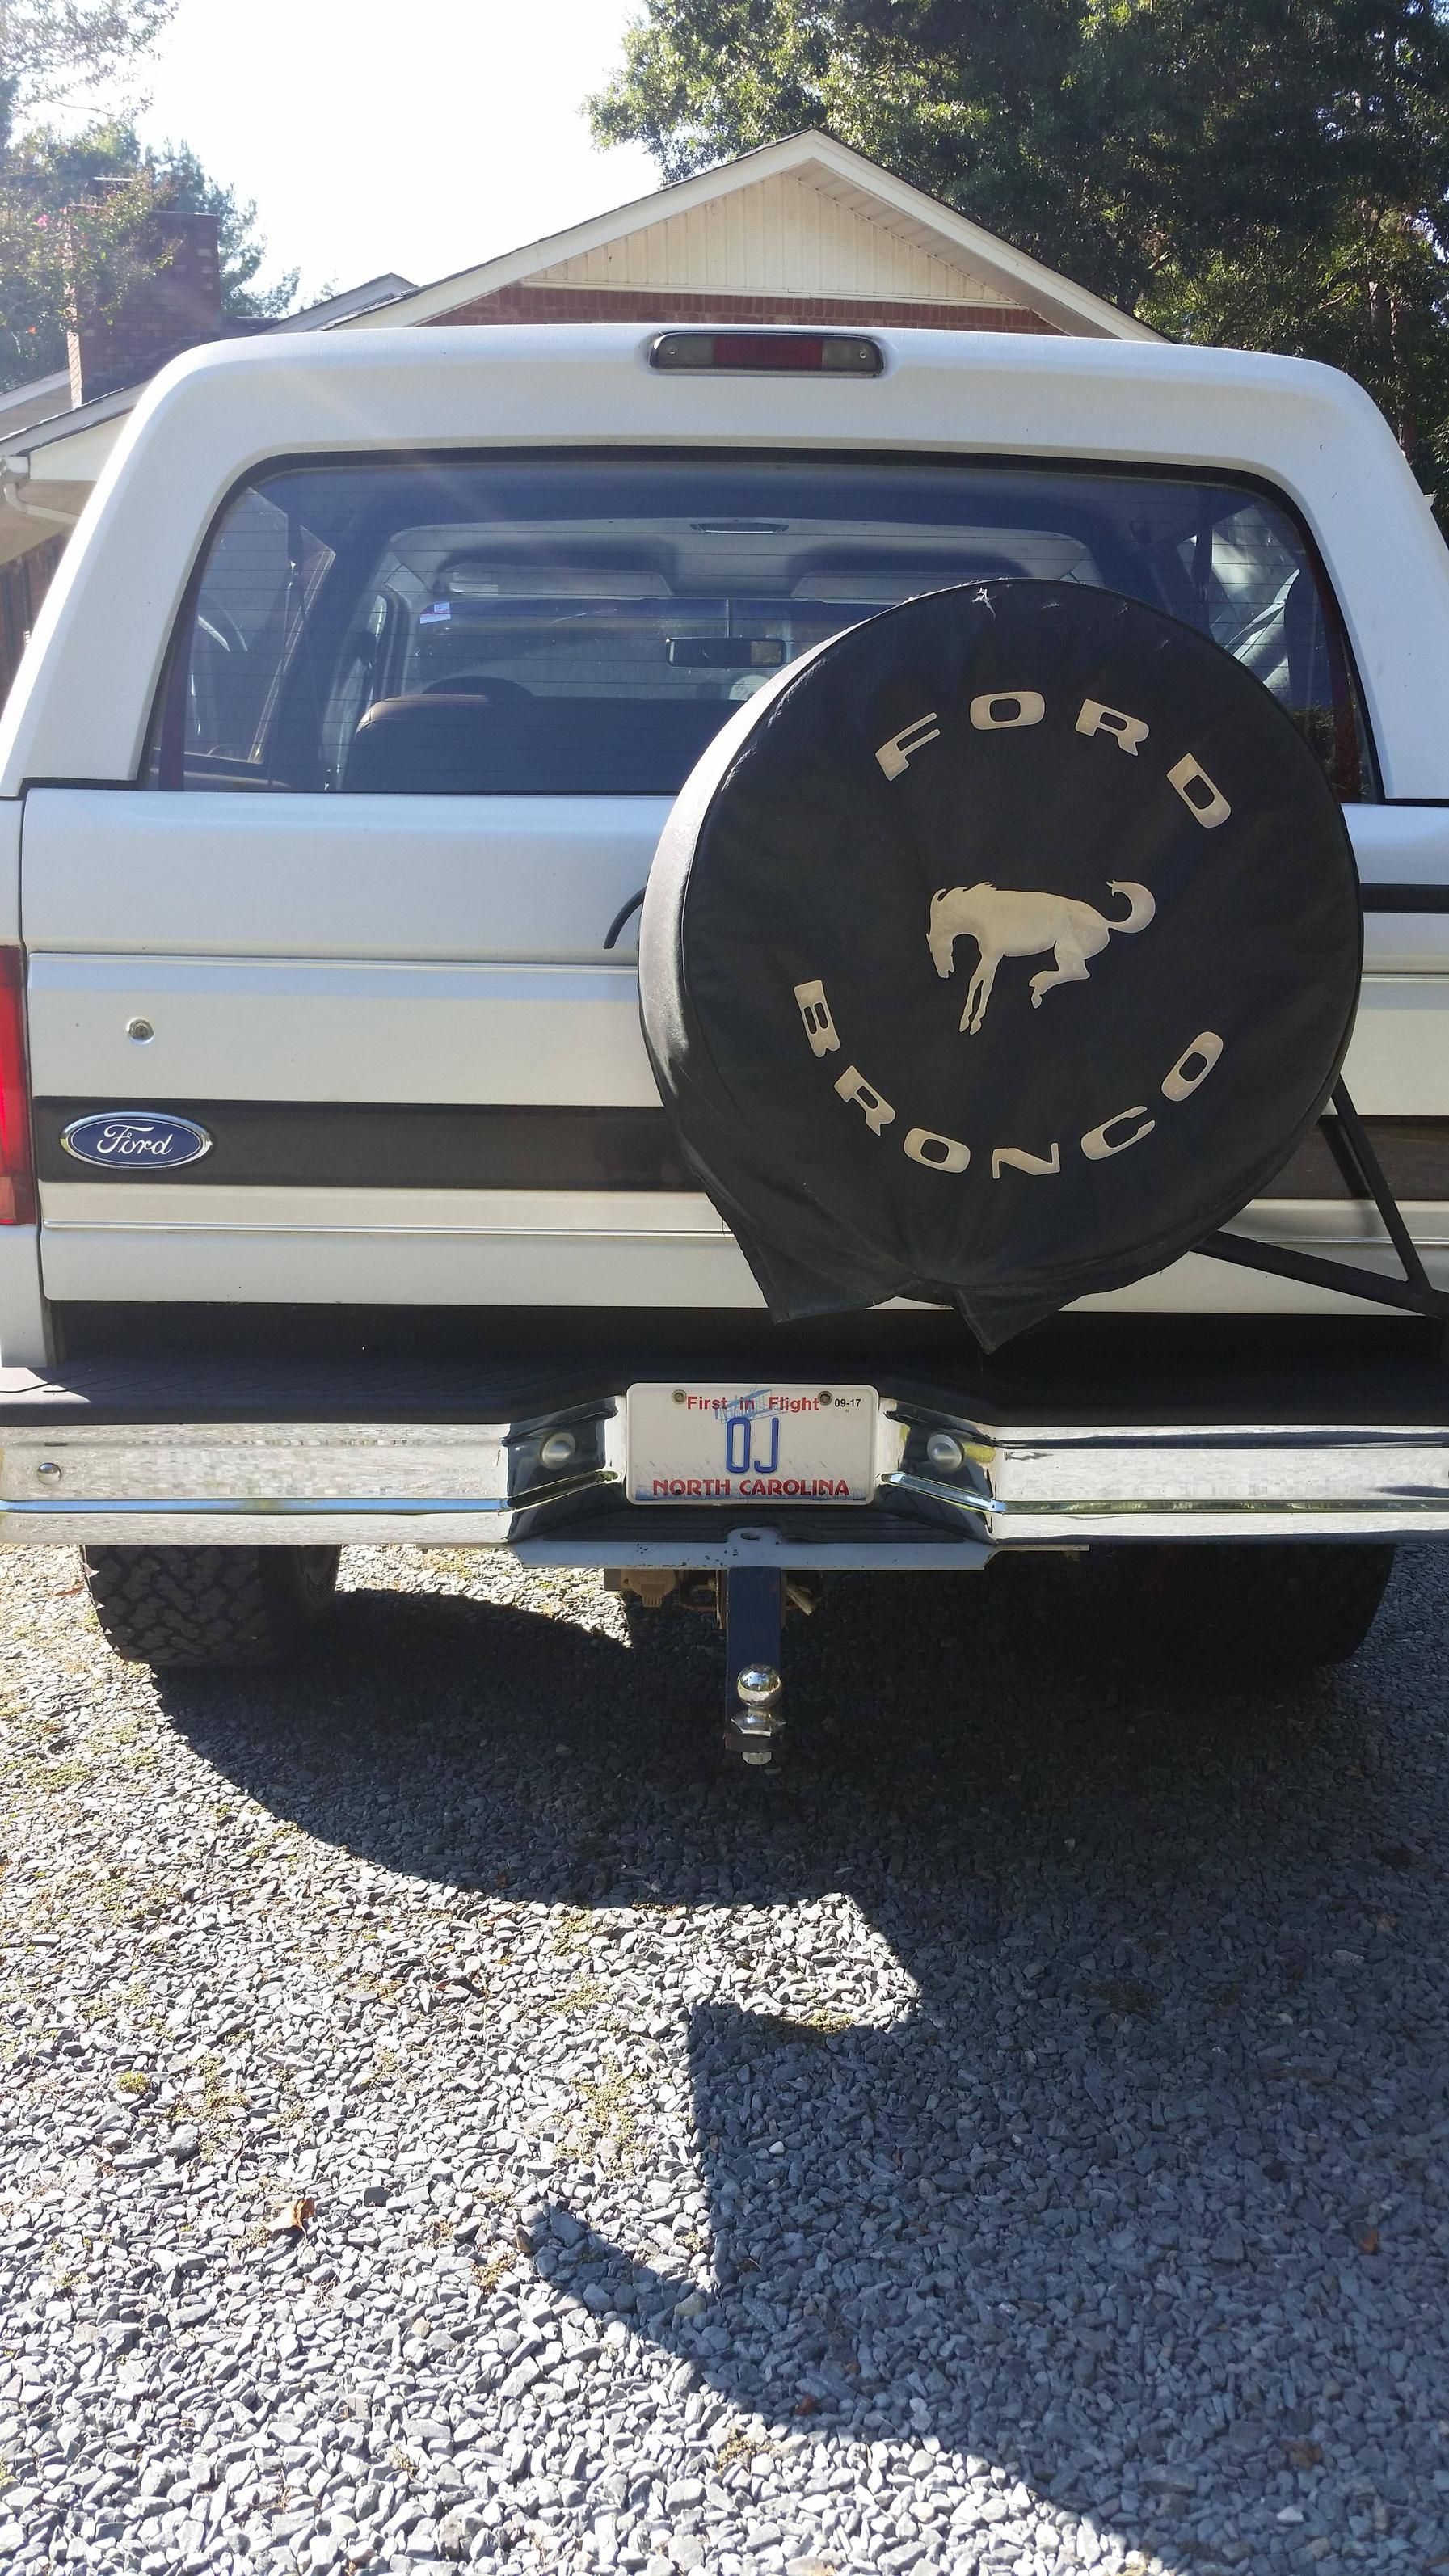 In response to the Not OJ plate on the front page, my Bronco embraces the juice